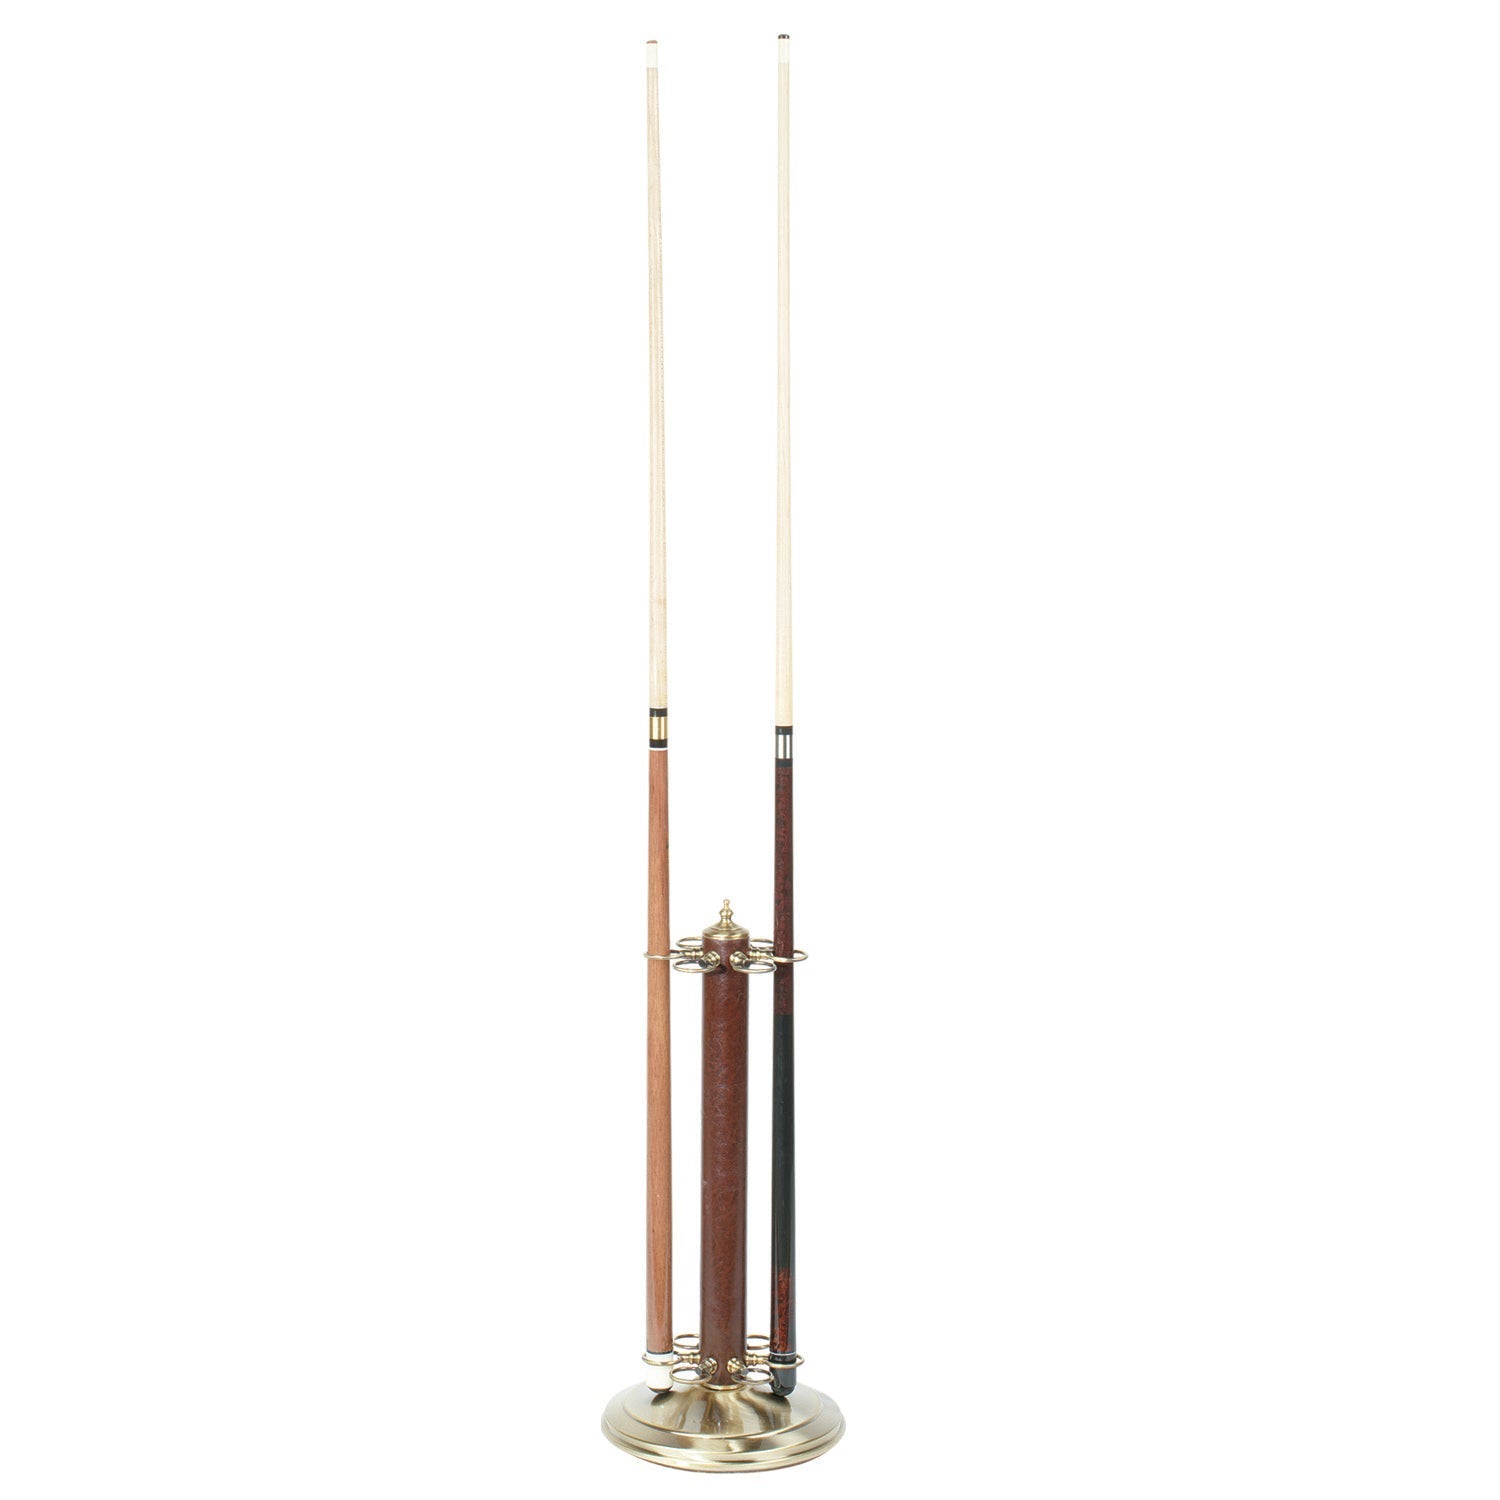 24"H POOL CUE HOLDER ANTIQUE BRASS-Game Table Genie